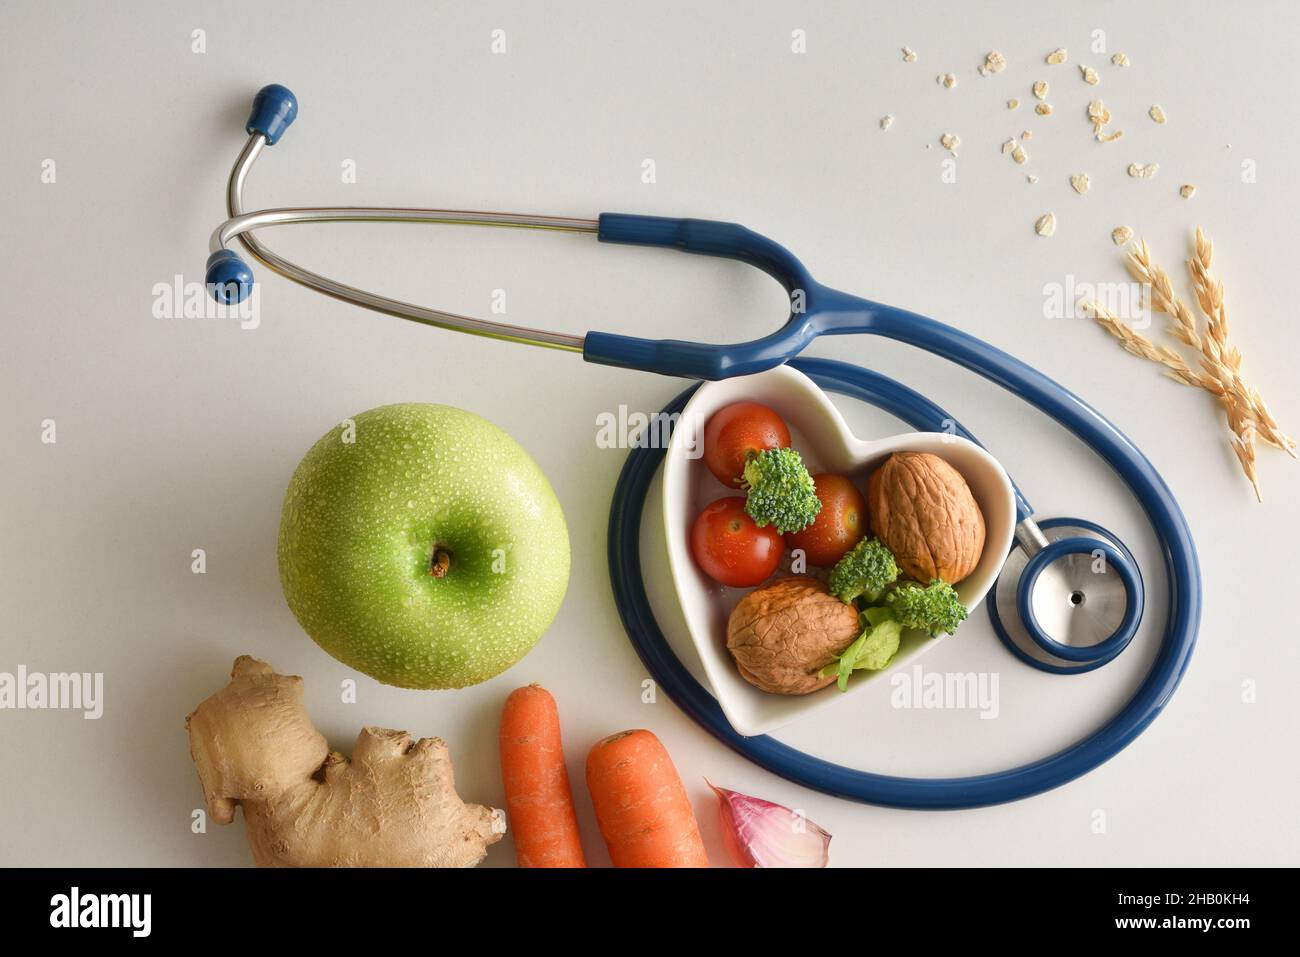 Healthy diet with fruits and vegetables on white table with heart shaped bowl and stethoscope. Top view. Horizontal composition. Stock Photo